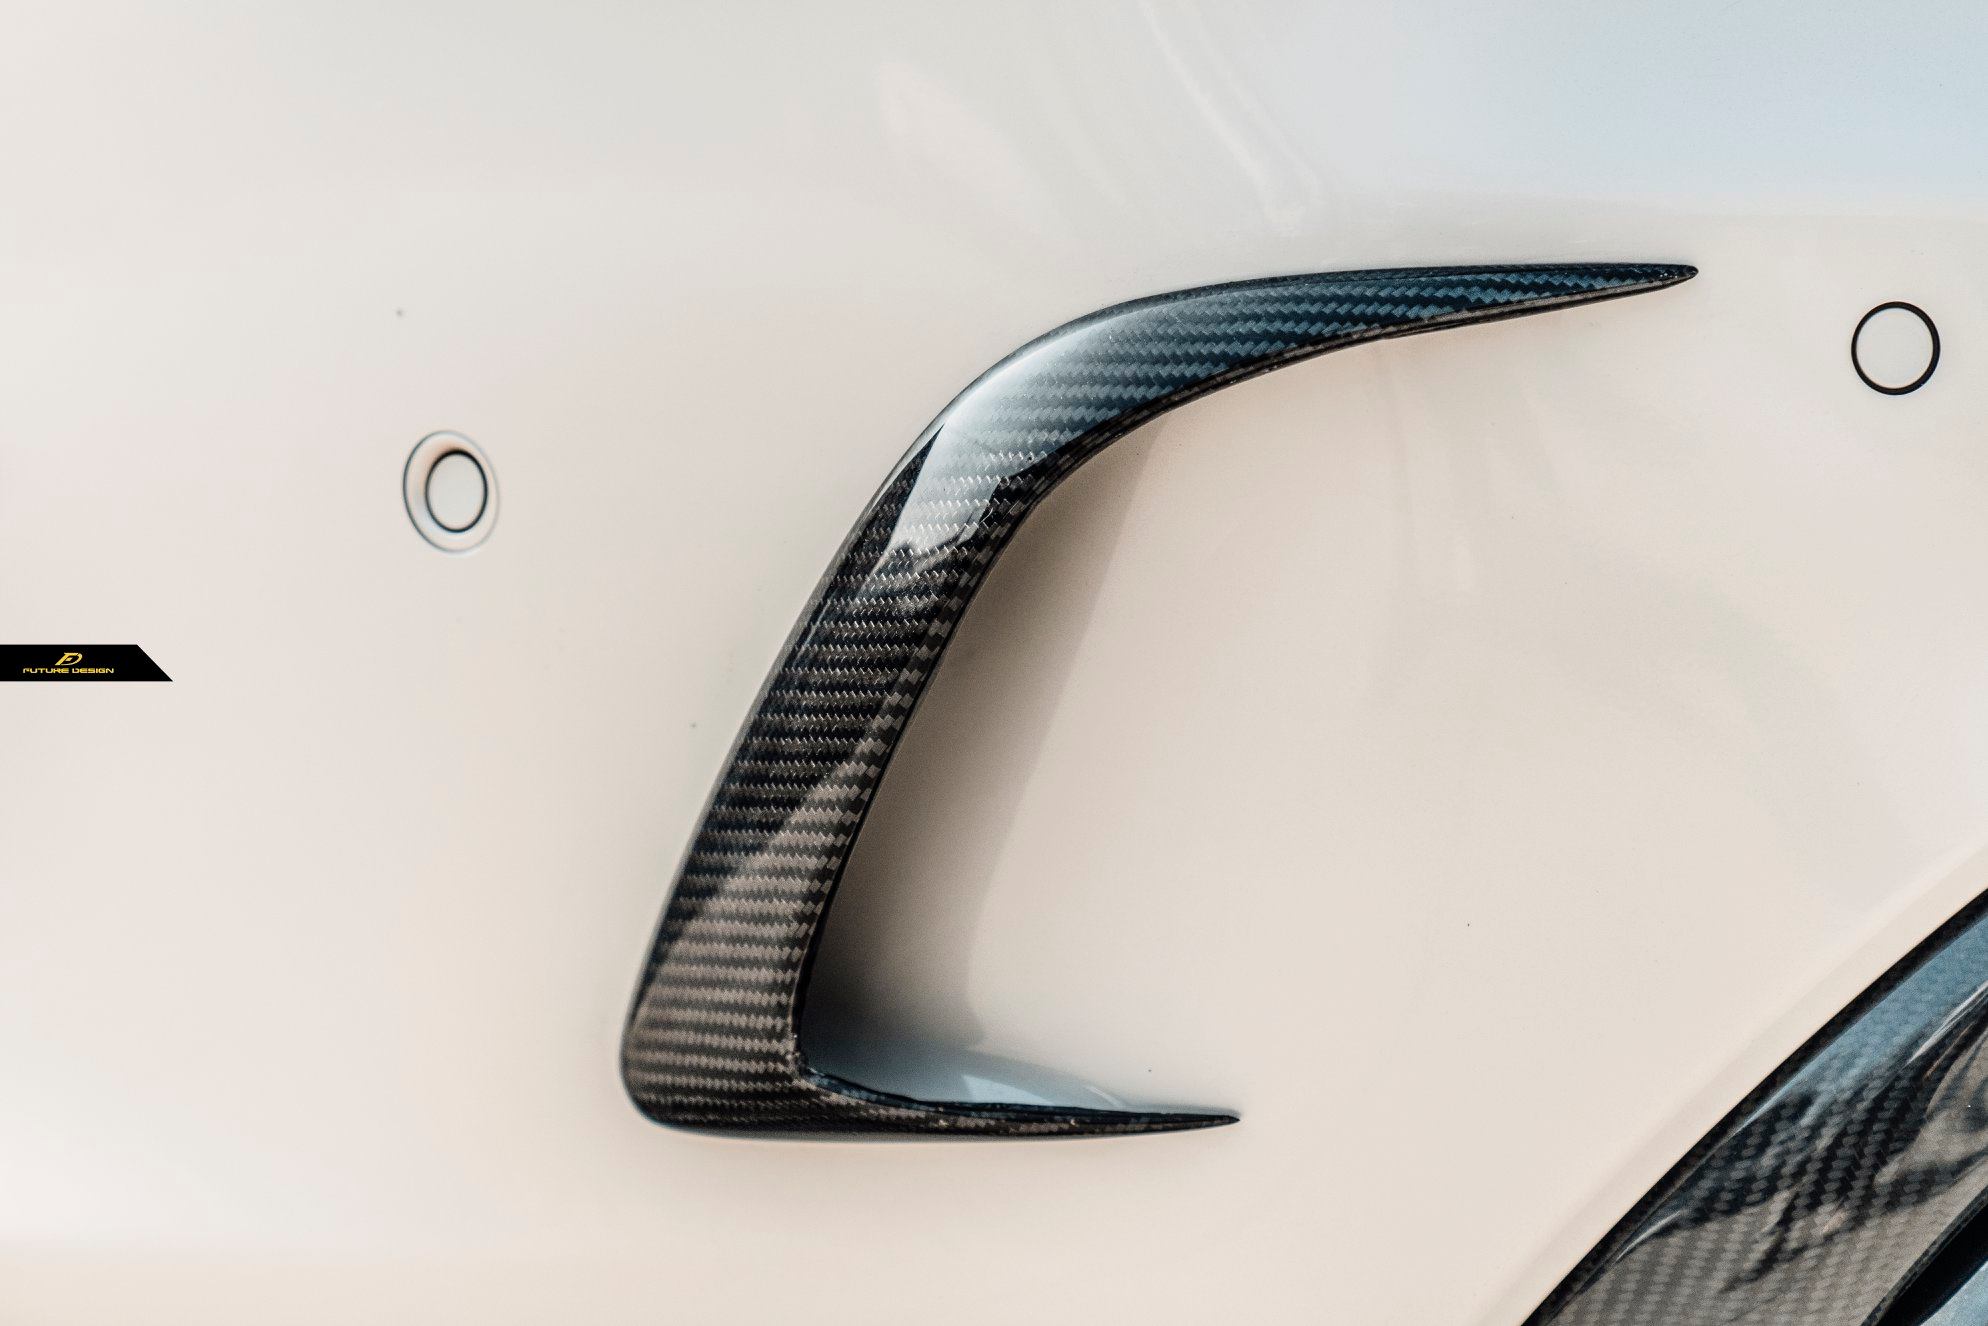 Mercedes Benz C-Class/C63/C43 AMG Line (S205) Estate/Wagon Dedicated Carbon Fibre Rear Bumper Canards - Manufactured from 100% Pre-Preg Japanese Carbon Fibre in a 2*2 Carbon Fibre Twill Weave, This product offers a new look to the rear end of the S205 Wagon/Estate C-Class Mercedes Models with its designed look to surround the original rear vents for this bumper.